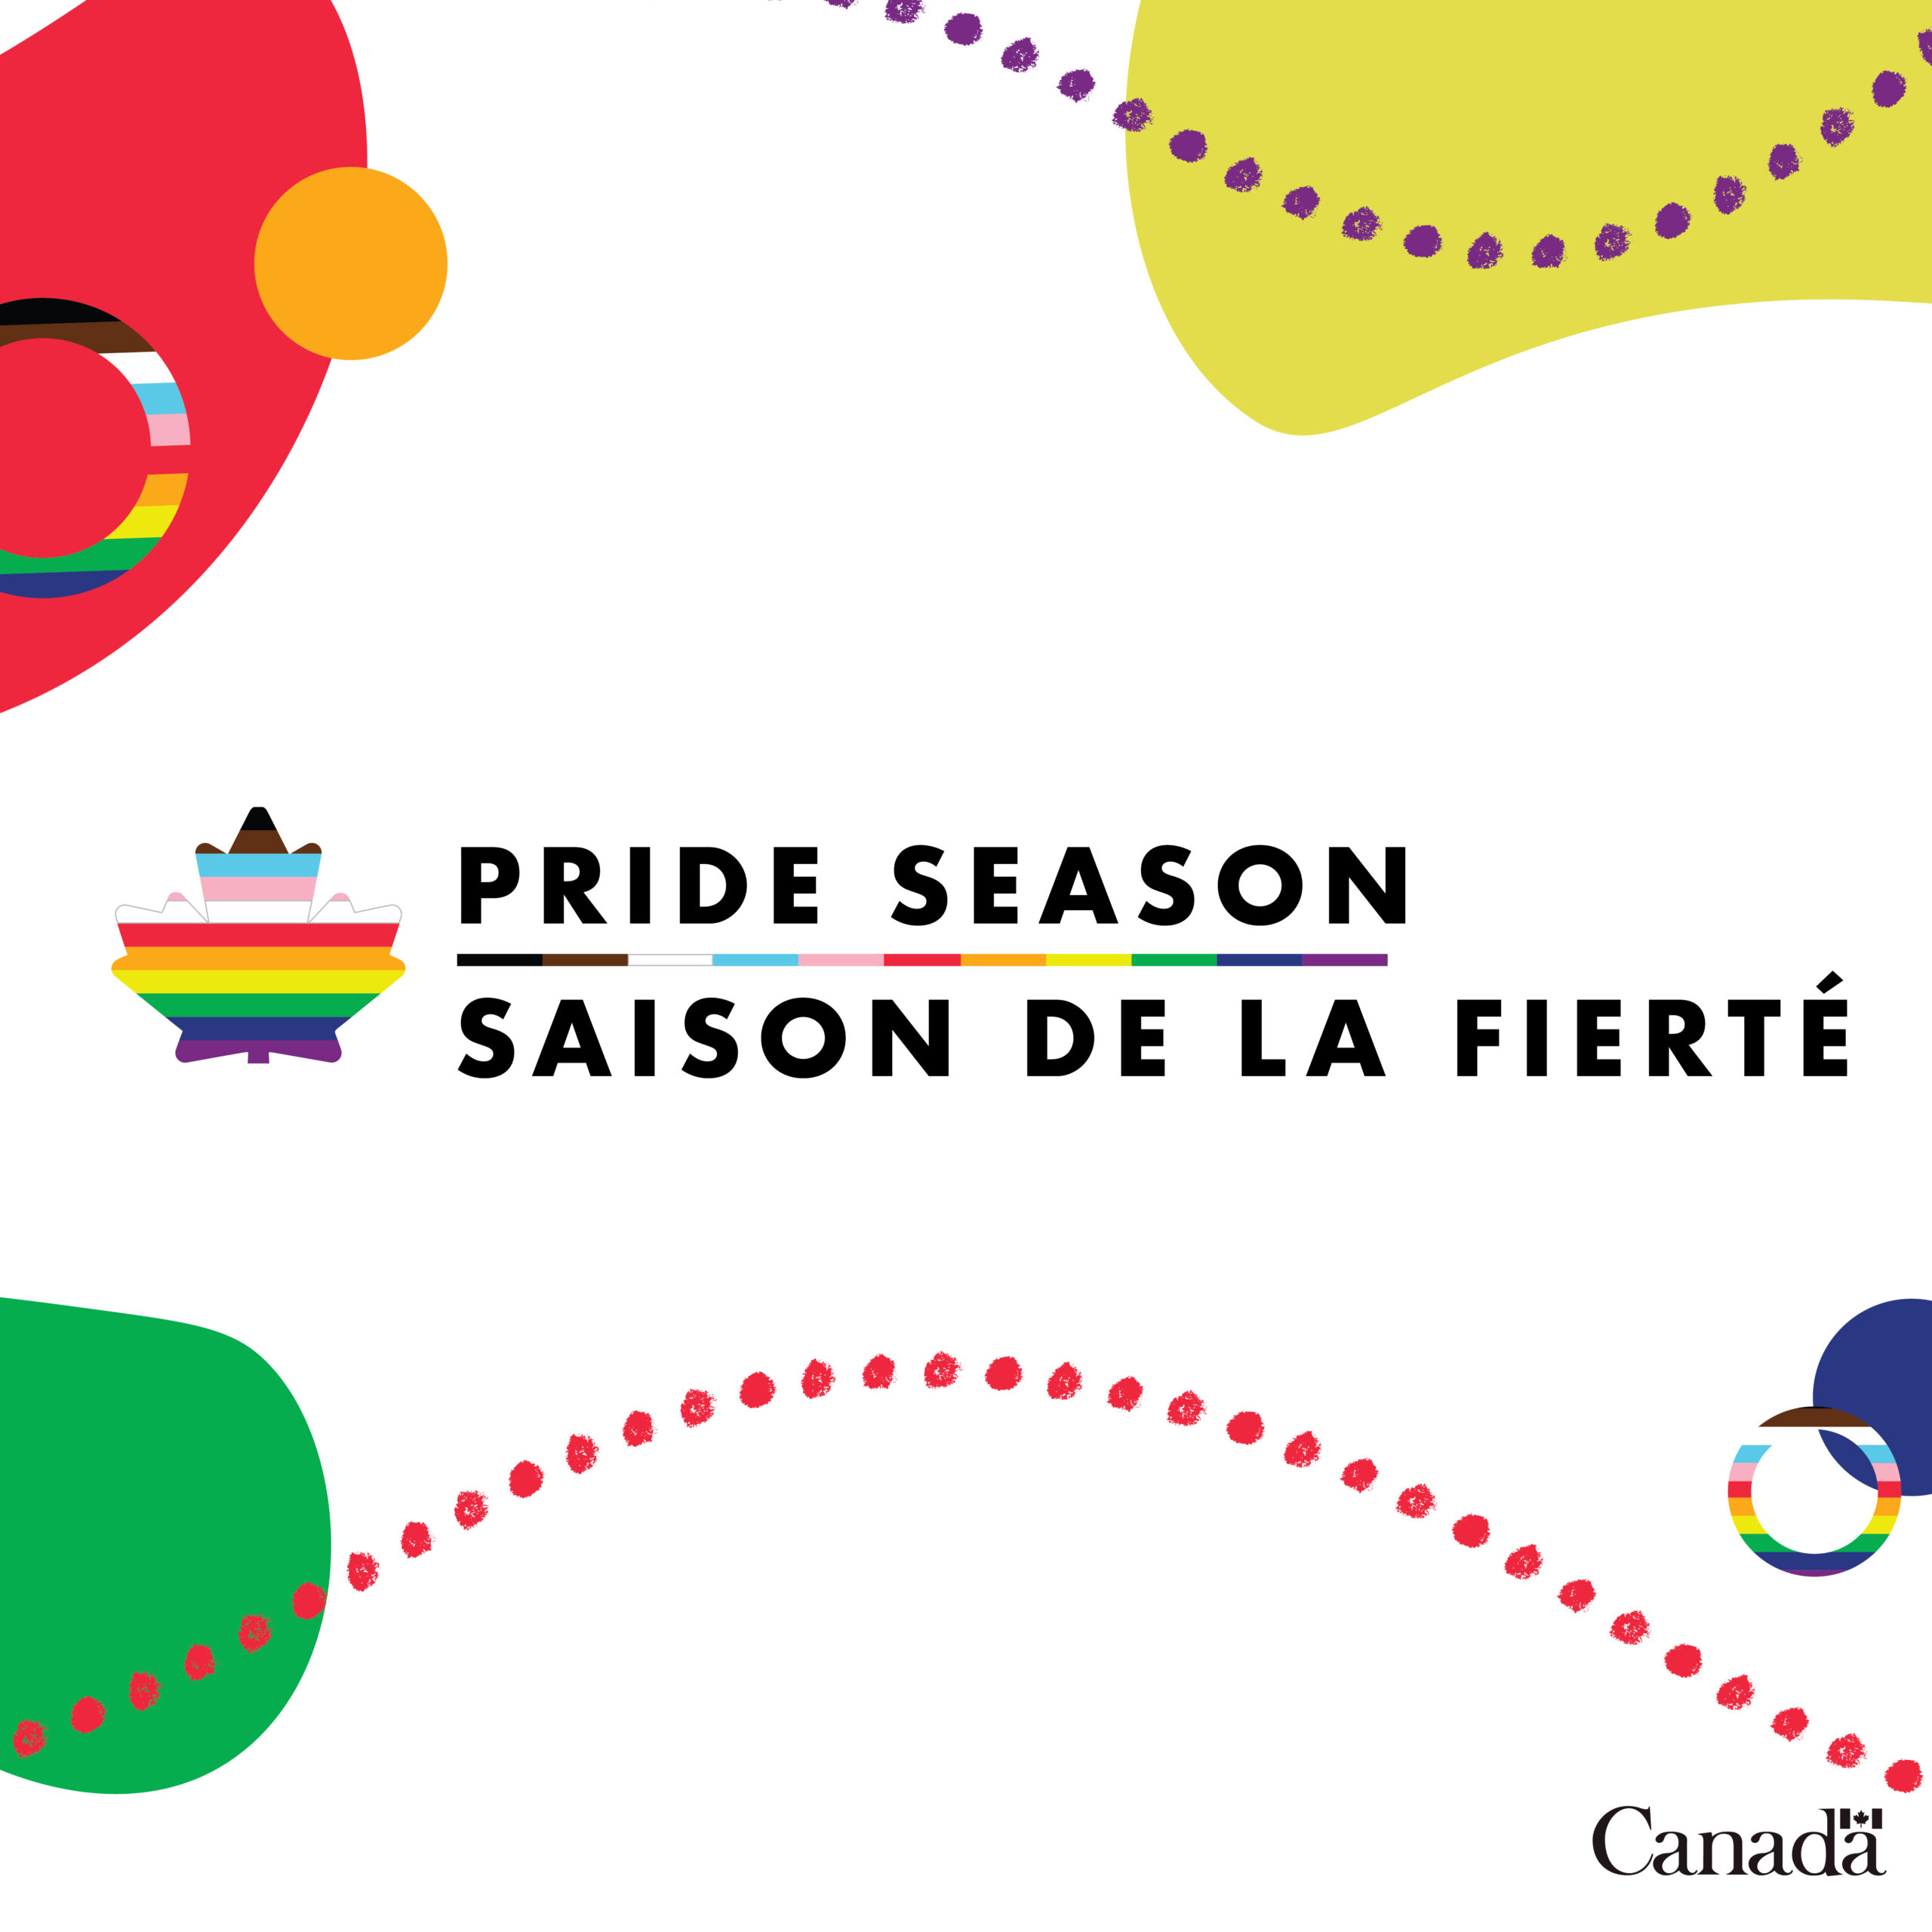 White background image with colourful pop art shapes around the edges. A maple leaf with the rainbow colours of the Progress Pride Flag, which are black, brown, light blue, light pink, white, red, orange, yellow, green, blue, and violet, and the words Pride Season Saison de la Fierté appear in the middle. The Canada wordmark is in the bottom right corner.